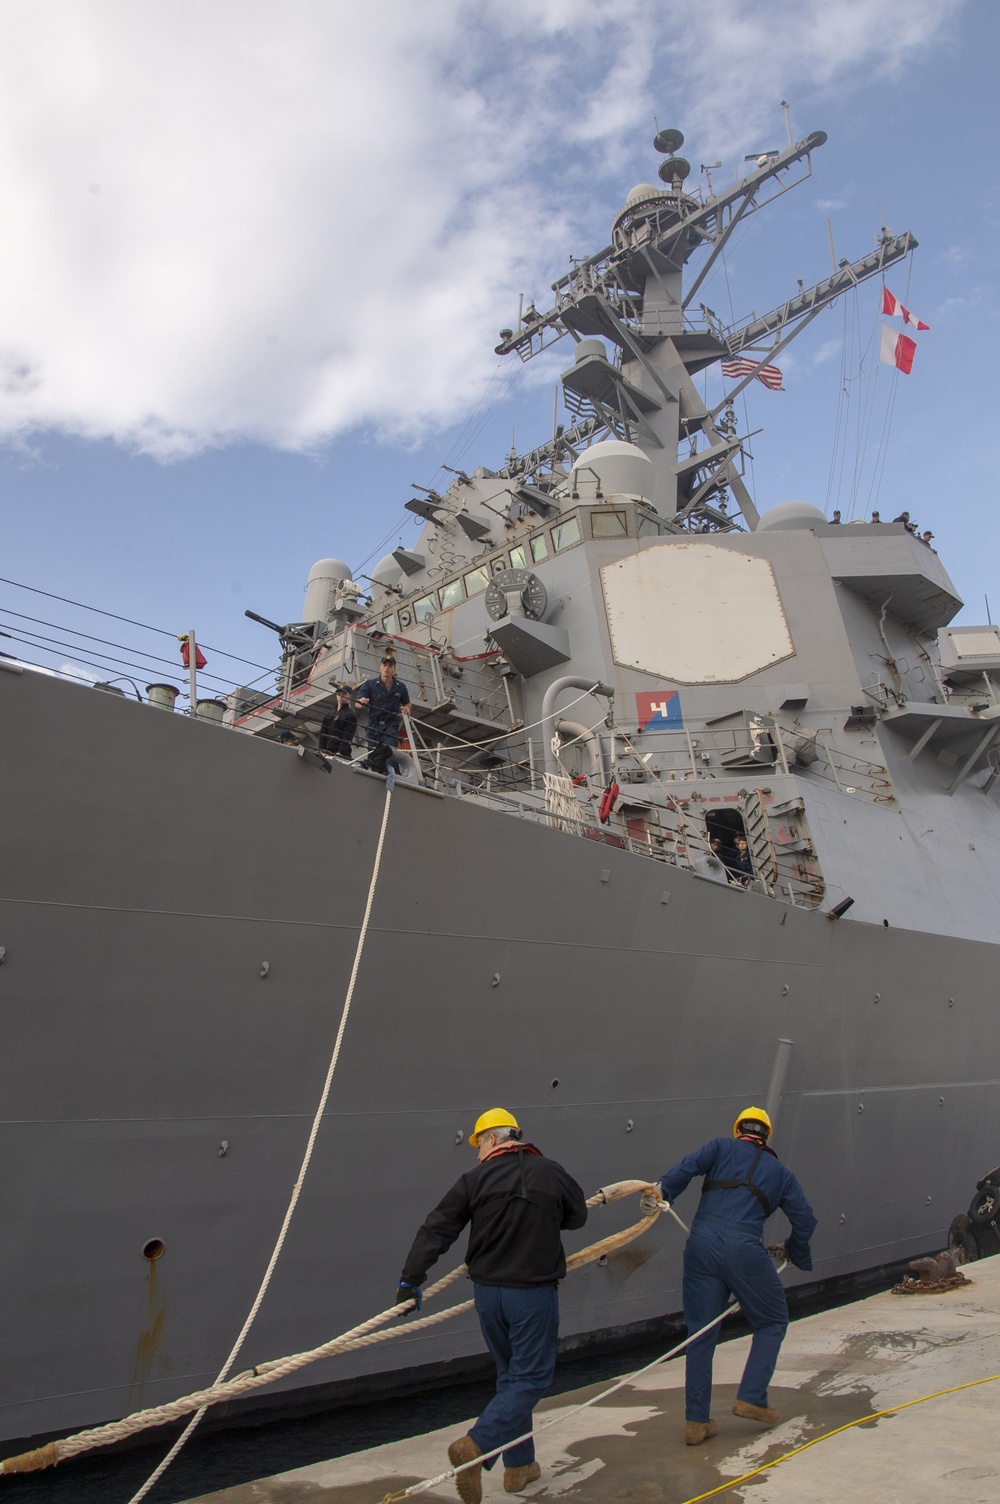 Naval Support Activity (NSA) Souda Bay port operations line handlers heave a mooring line as the Arleigh Burke-class guided-missile destroyer USS Ross (DDG 71) moors pierside at Souda Bay, Greece, April 12, 2019.